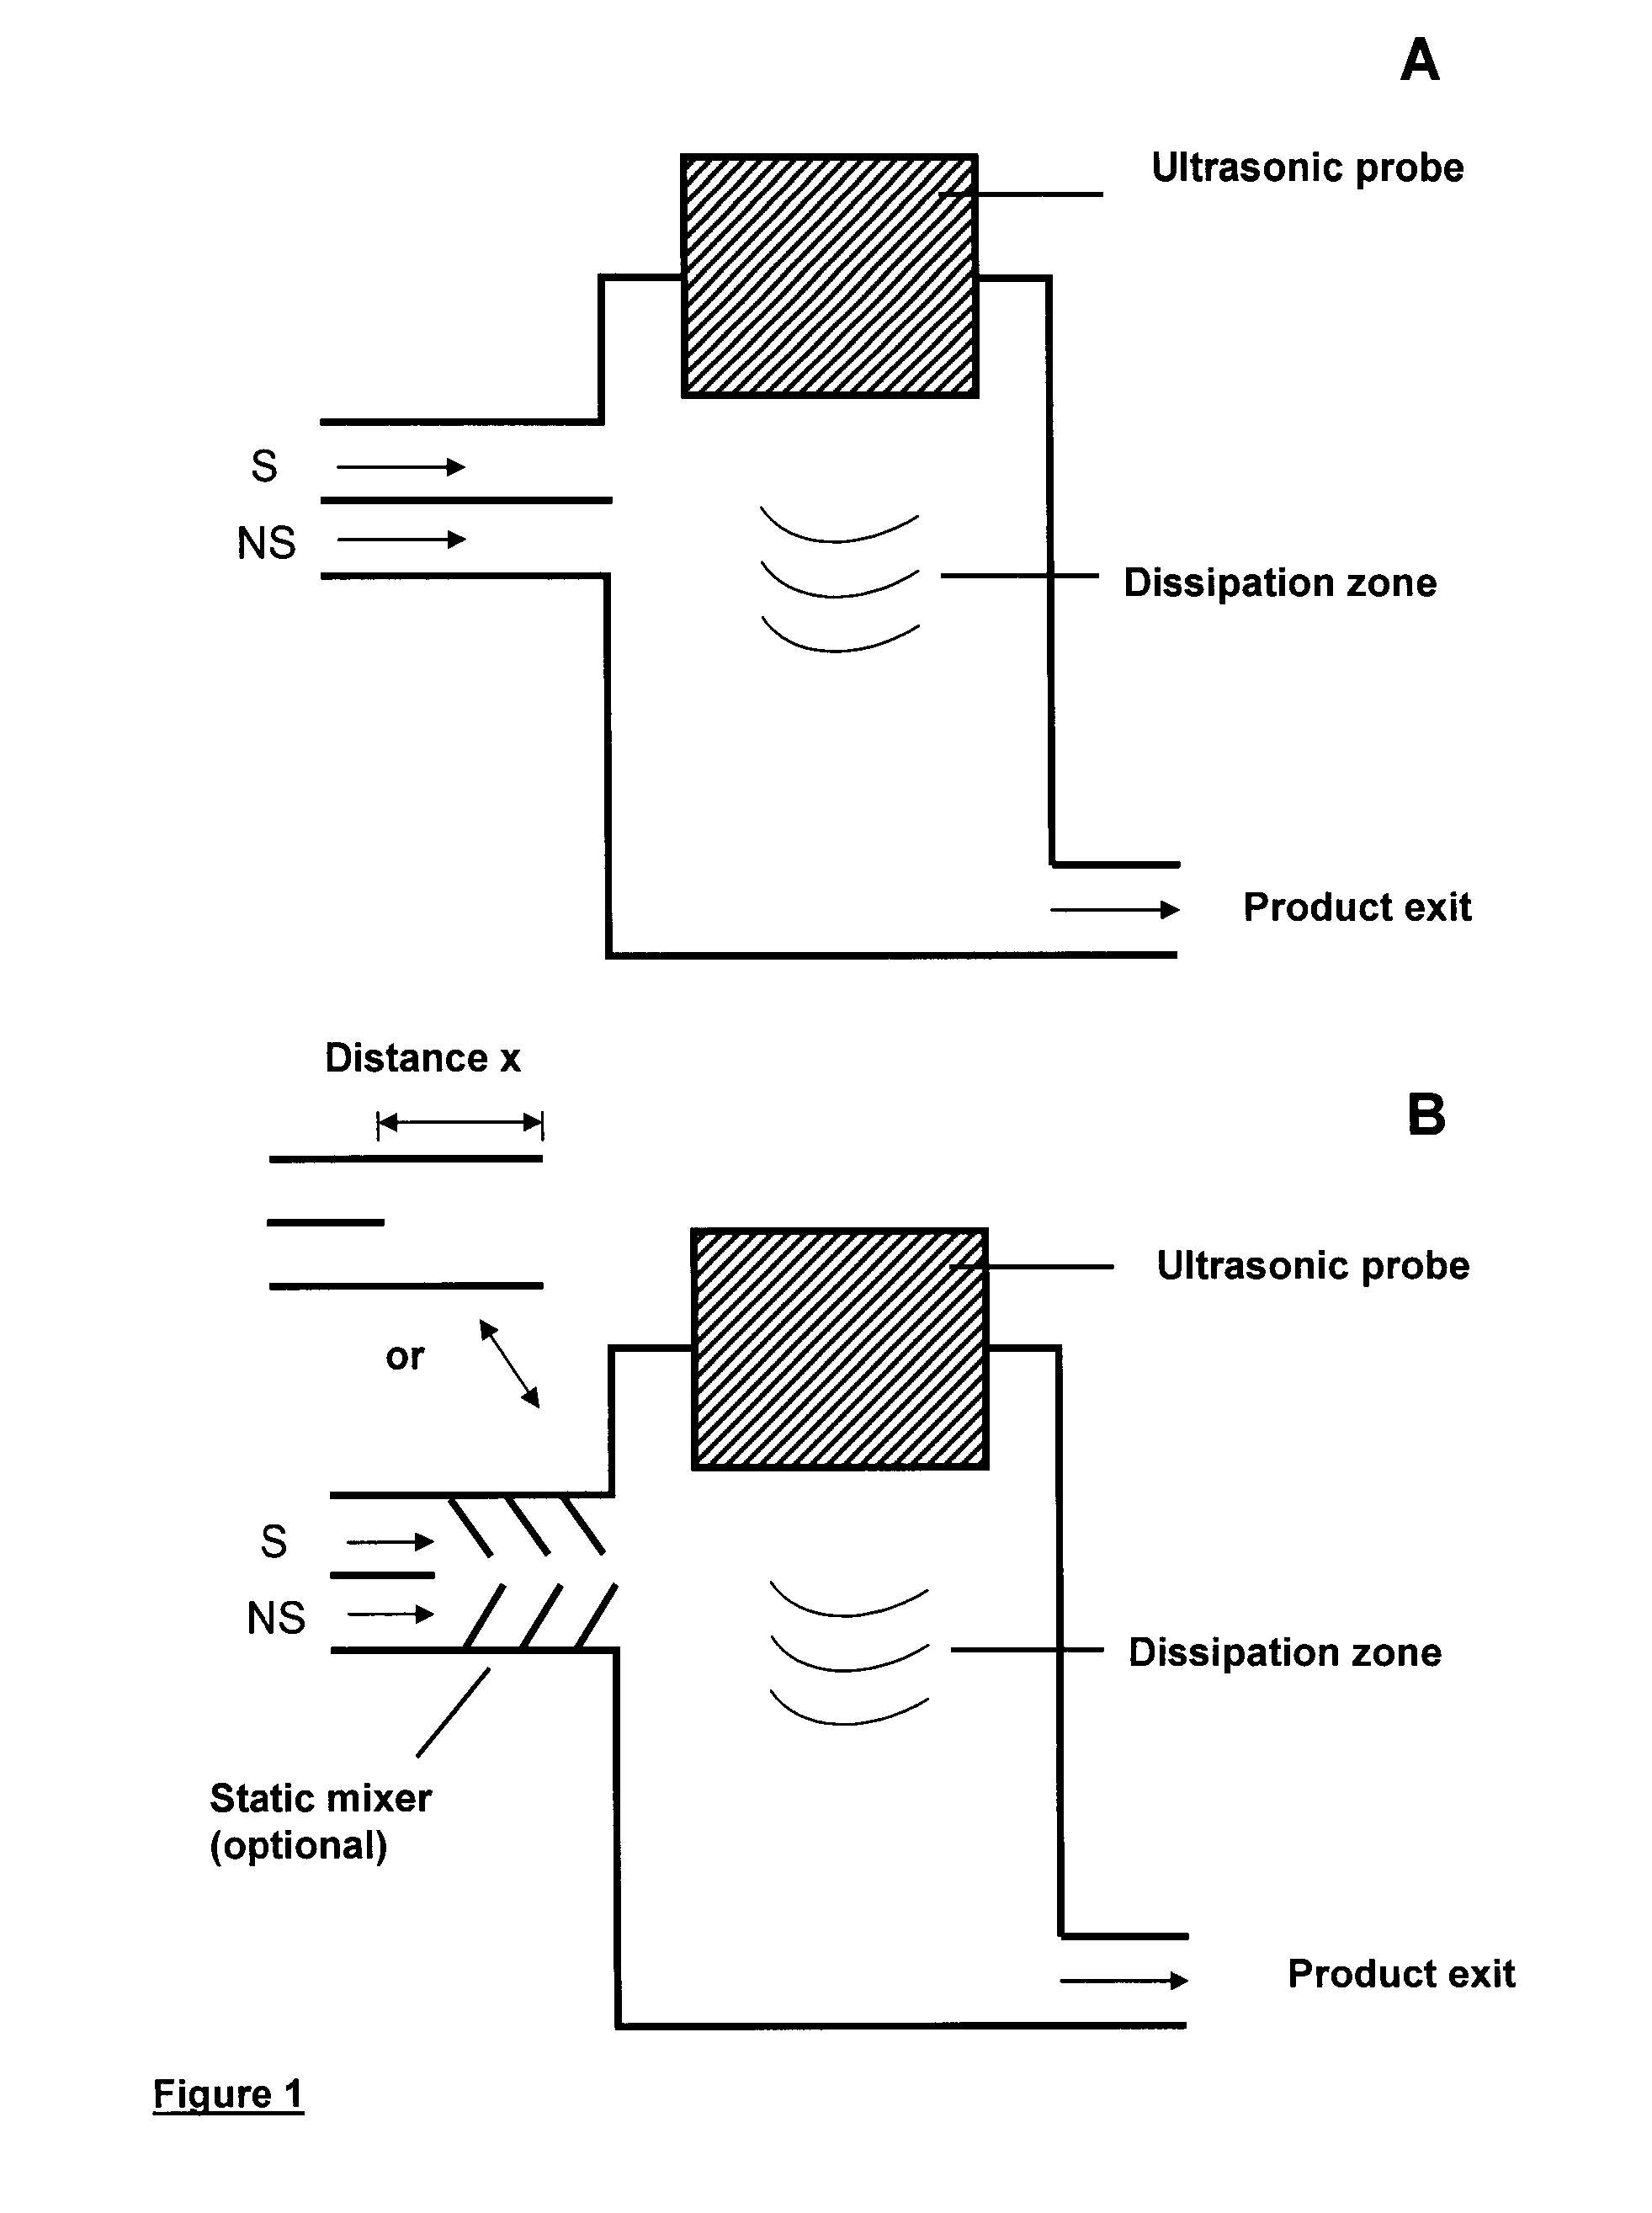 Method and device for producing very fine particles and coating such particles